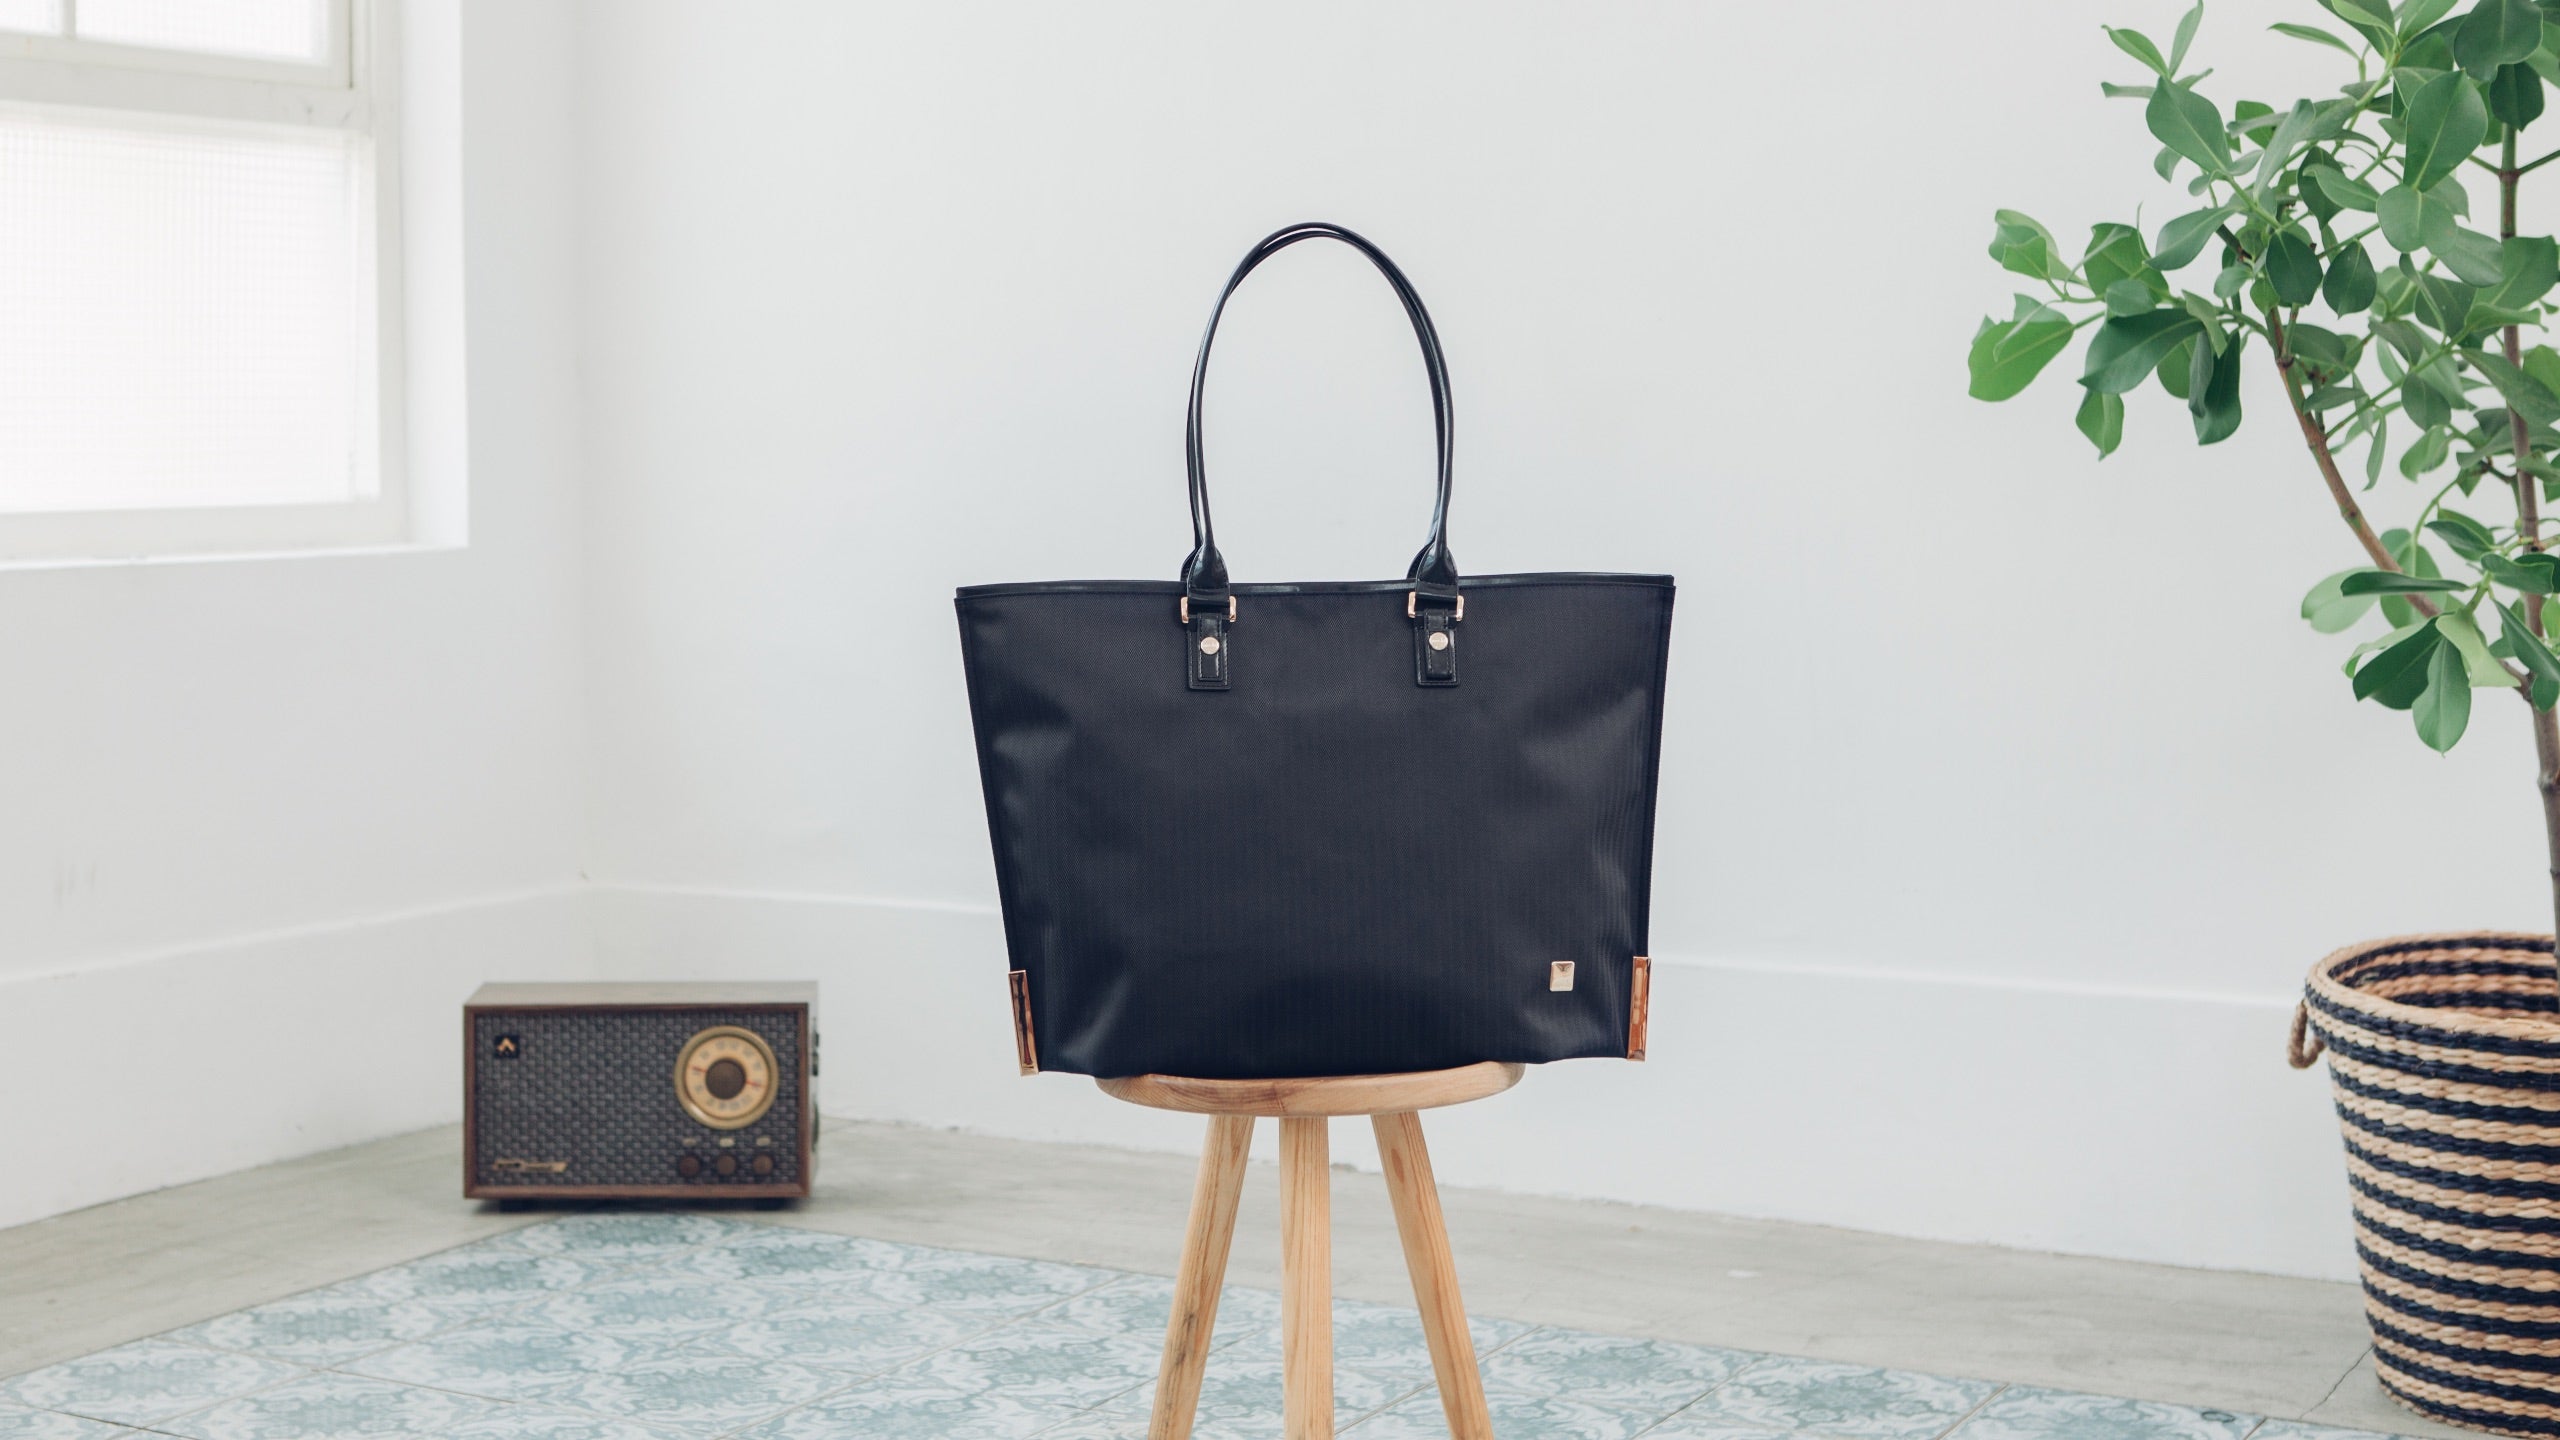 This Bag Is Meant To Go Out! Let's Make The ADORABLE Aria Mini